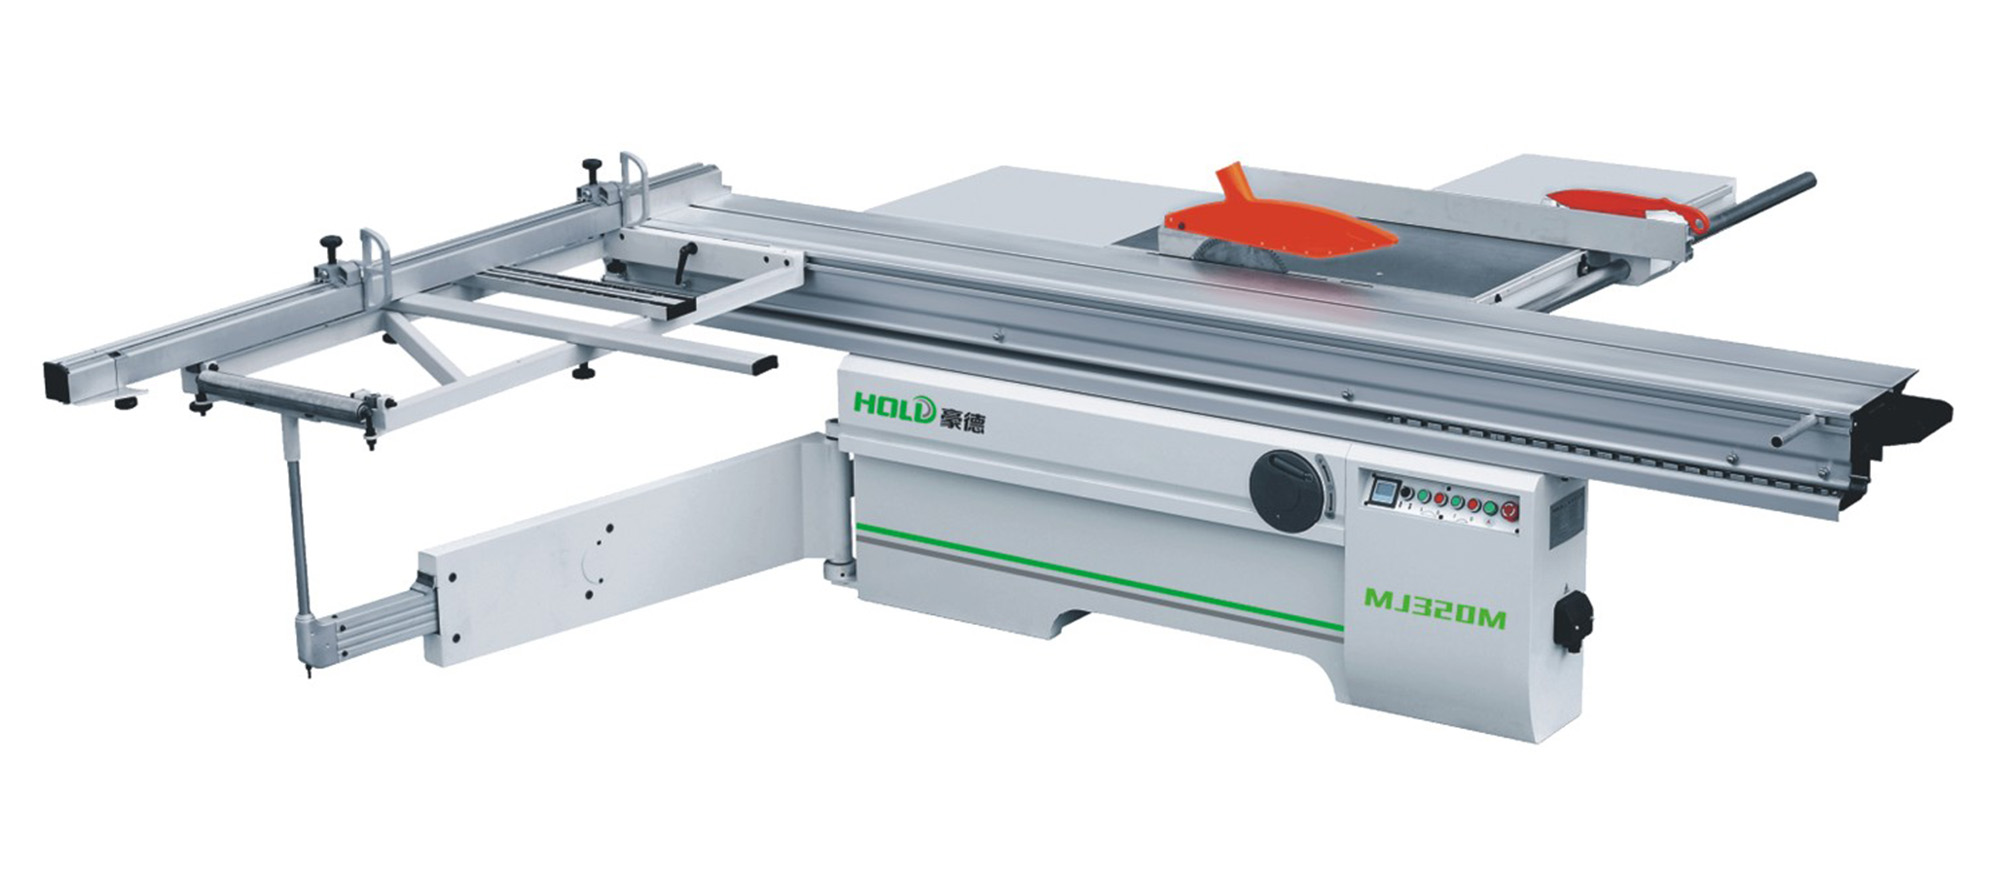 MJ320M Table saw